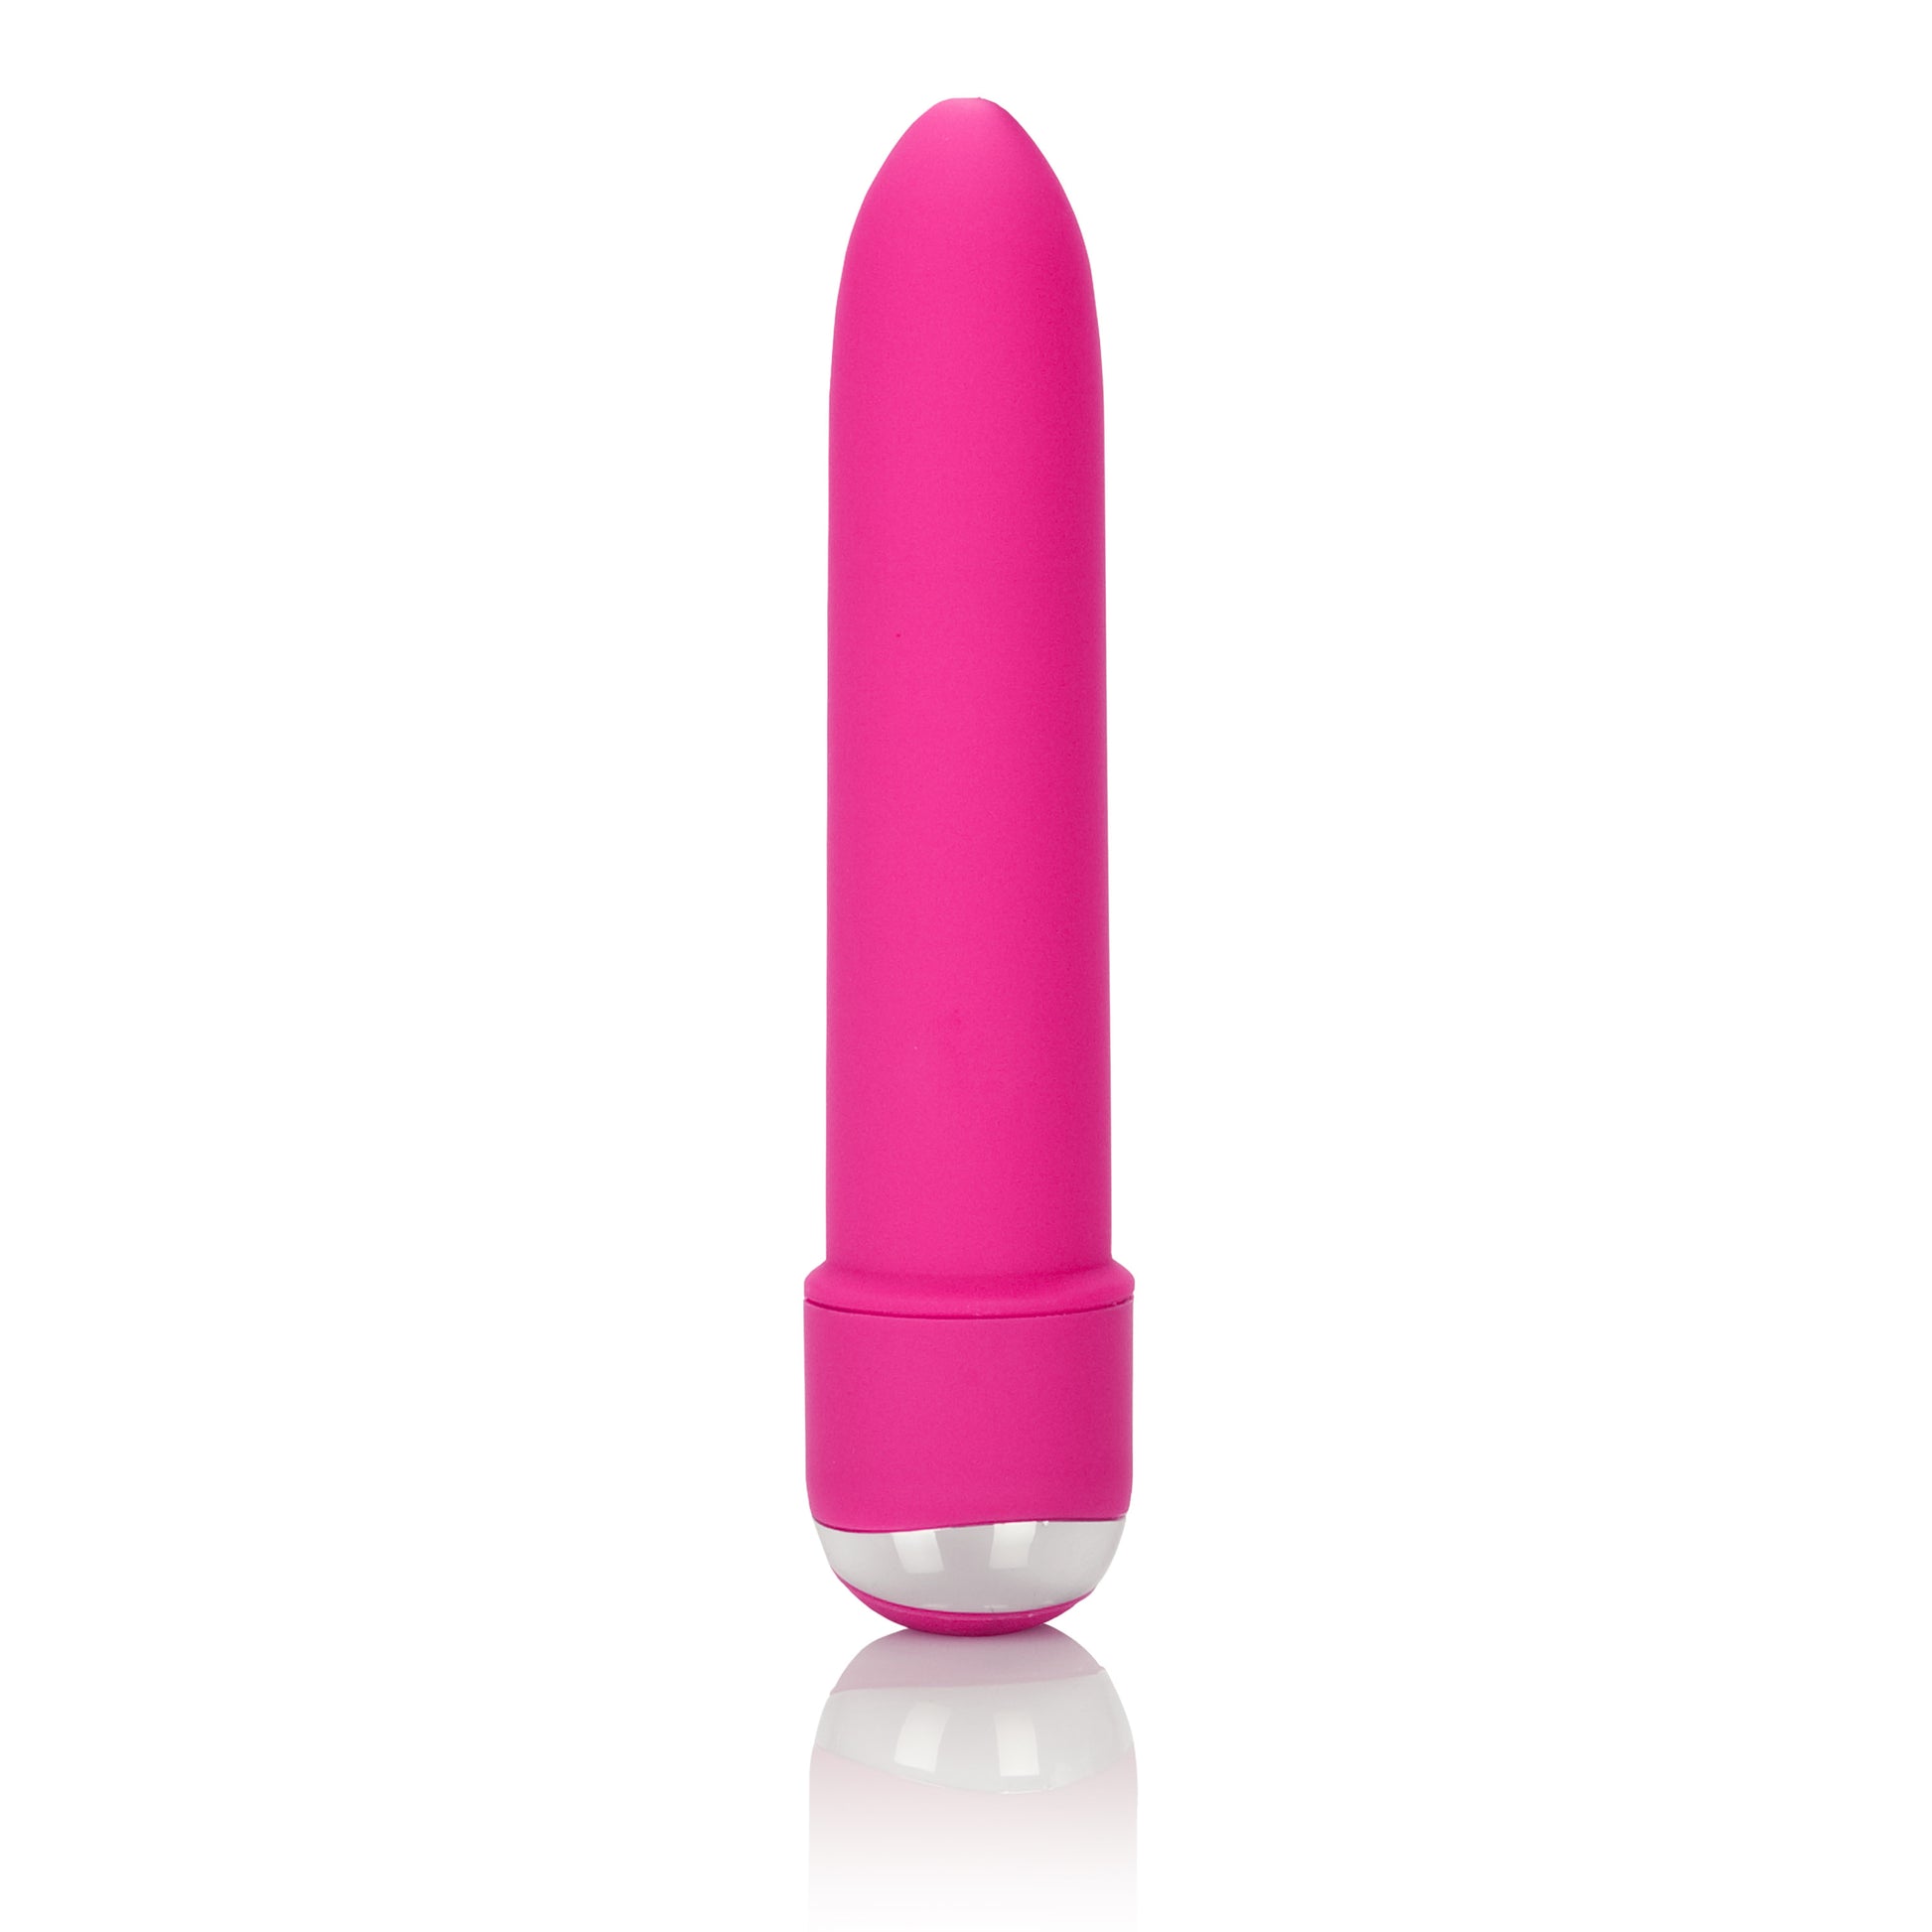 7 Function Classic Chic 4 Inches Vibe - Pink SE0499103